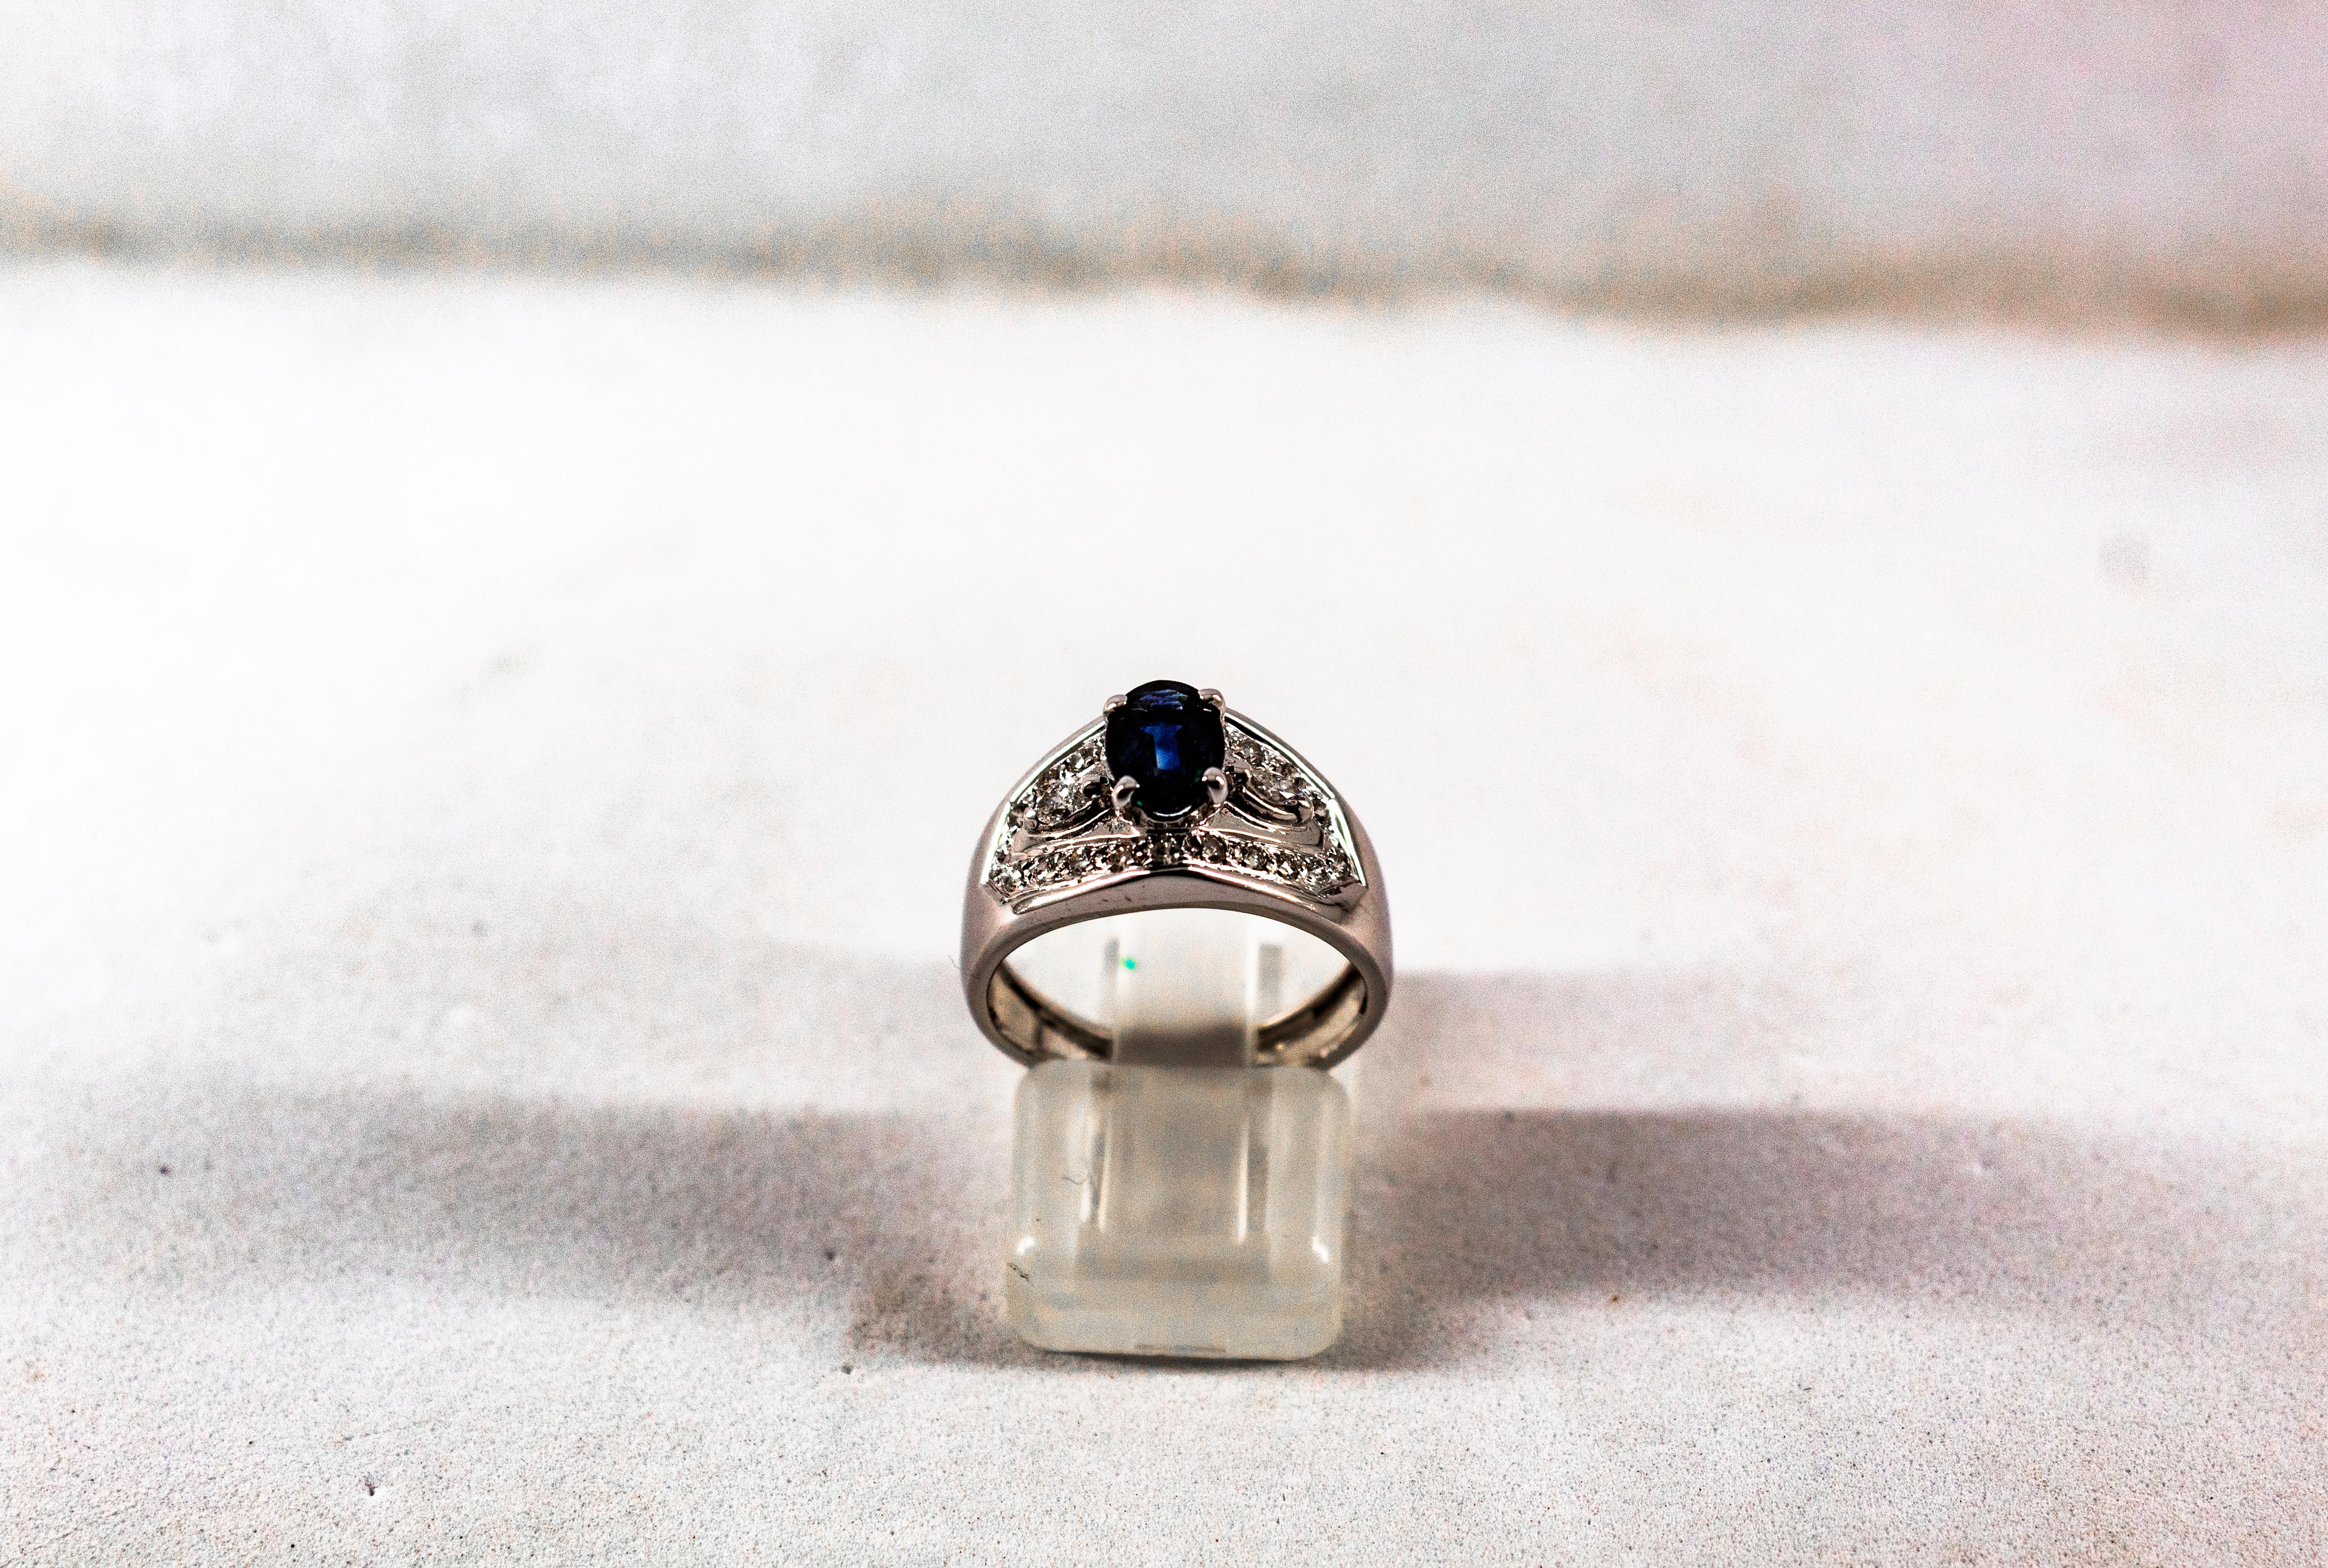 This Ring is made of 18K White Gold.
This Ring has 0.25 Carats of White Modern Round Cut Diamonds.
This Ring has a 0.80 Carats Blue Oval Cut Sapphire.
This Ring is inspired by Art Deco.

Size ITA: 11 USA: 5 1/2

We're a workshop so every piece is